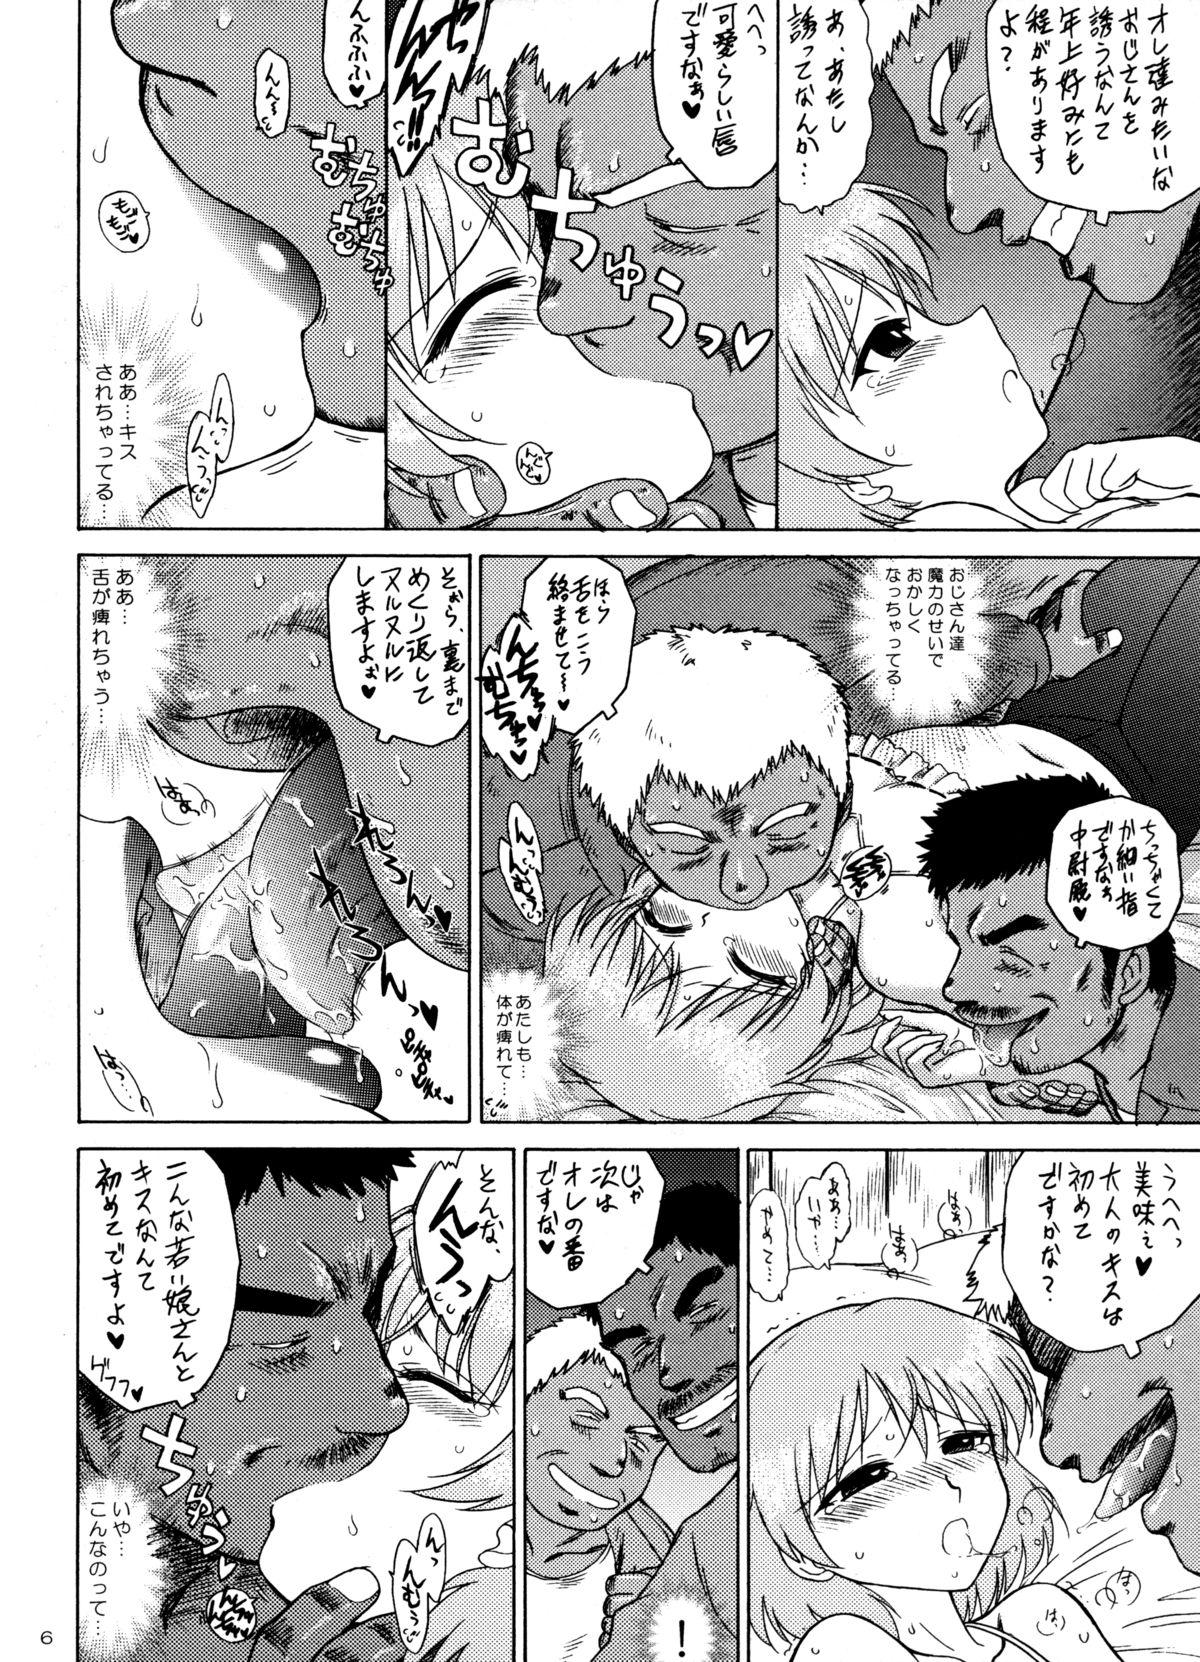 Mask SURVIVOR - Strike witches Free Real Porn - Page 5